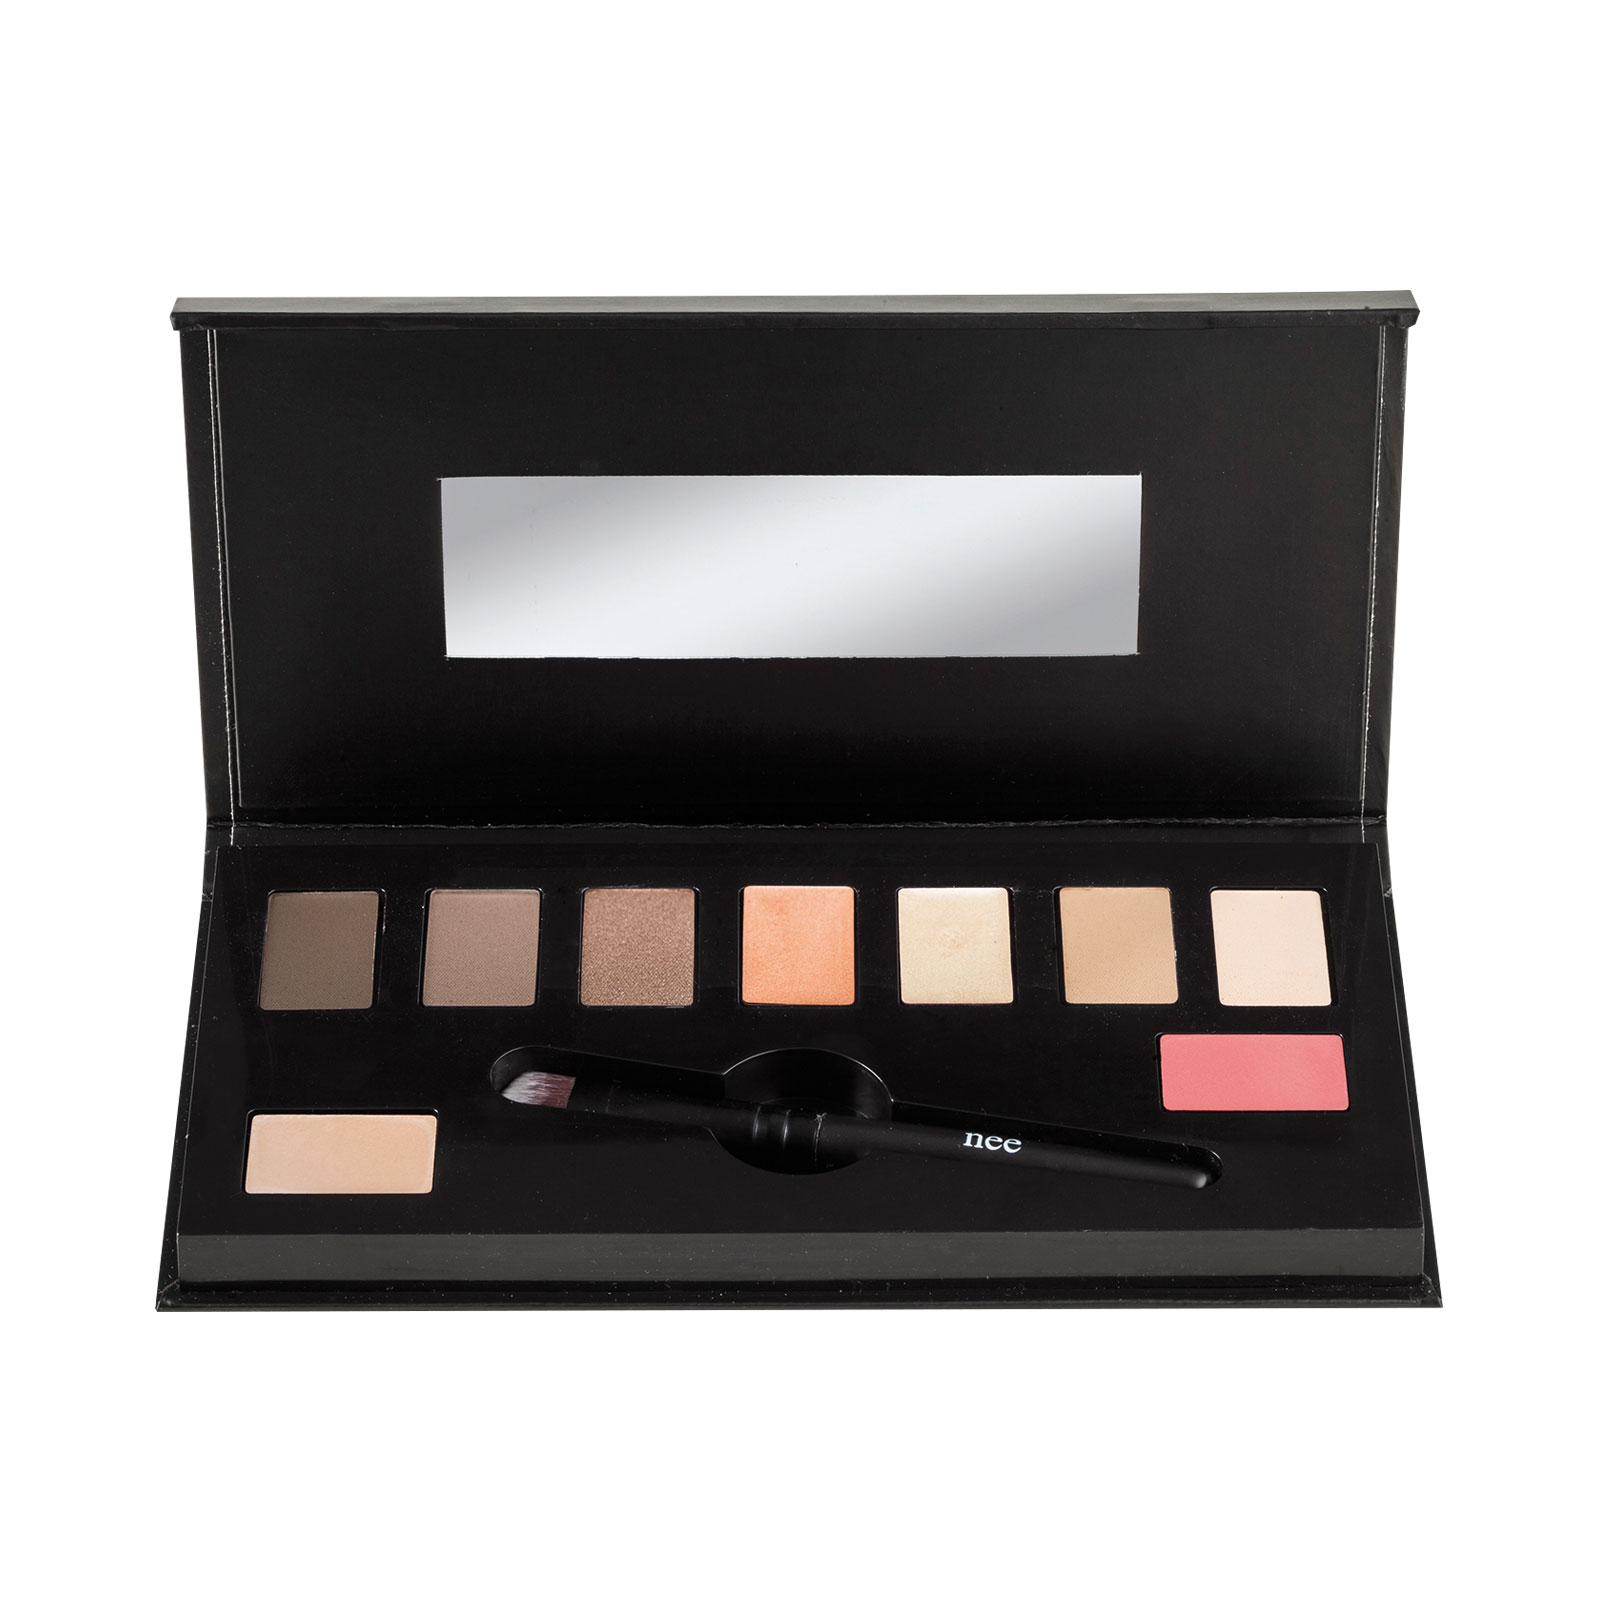 especial-products_nude-palette.jpg